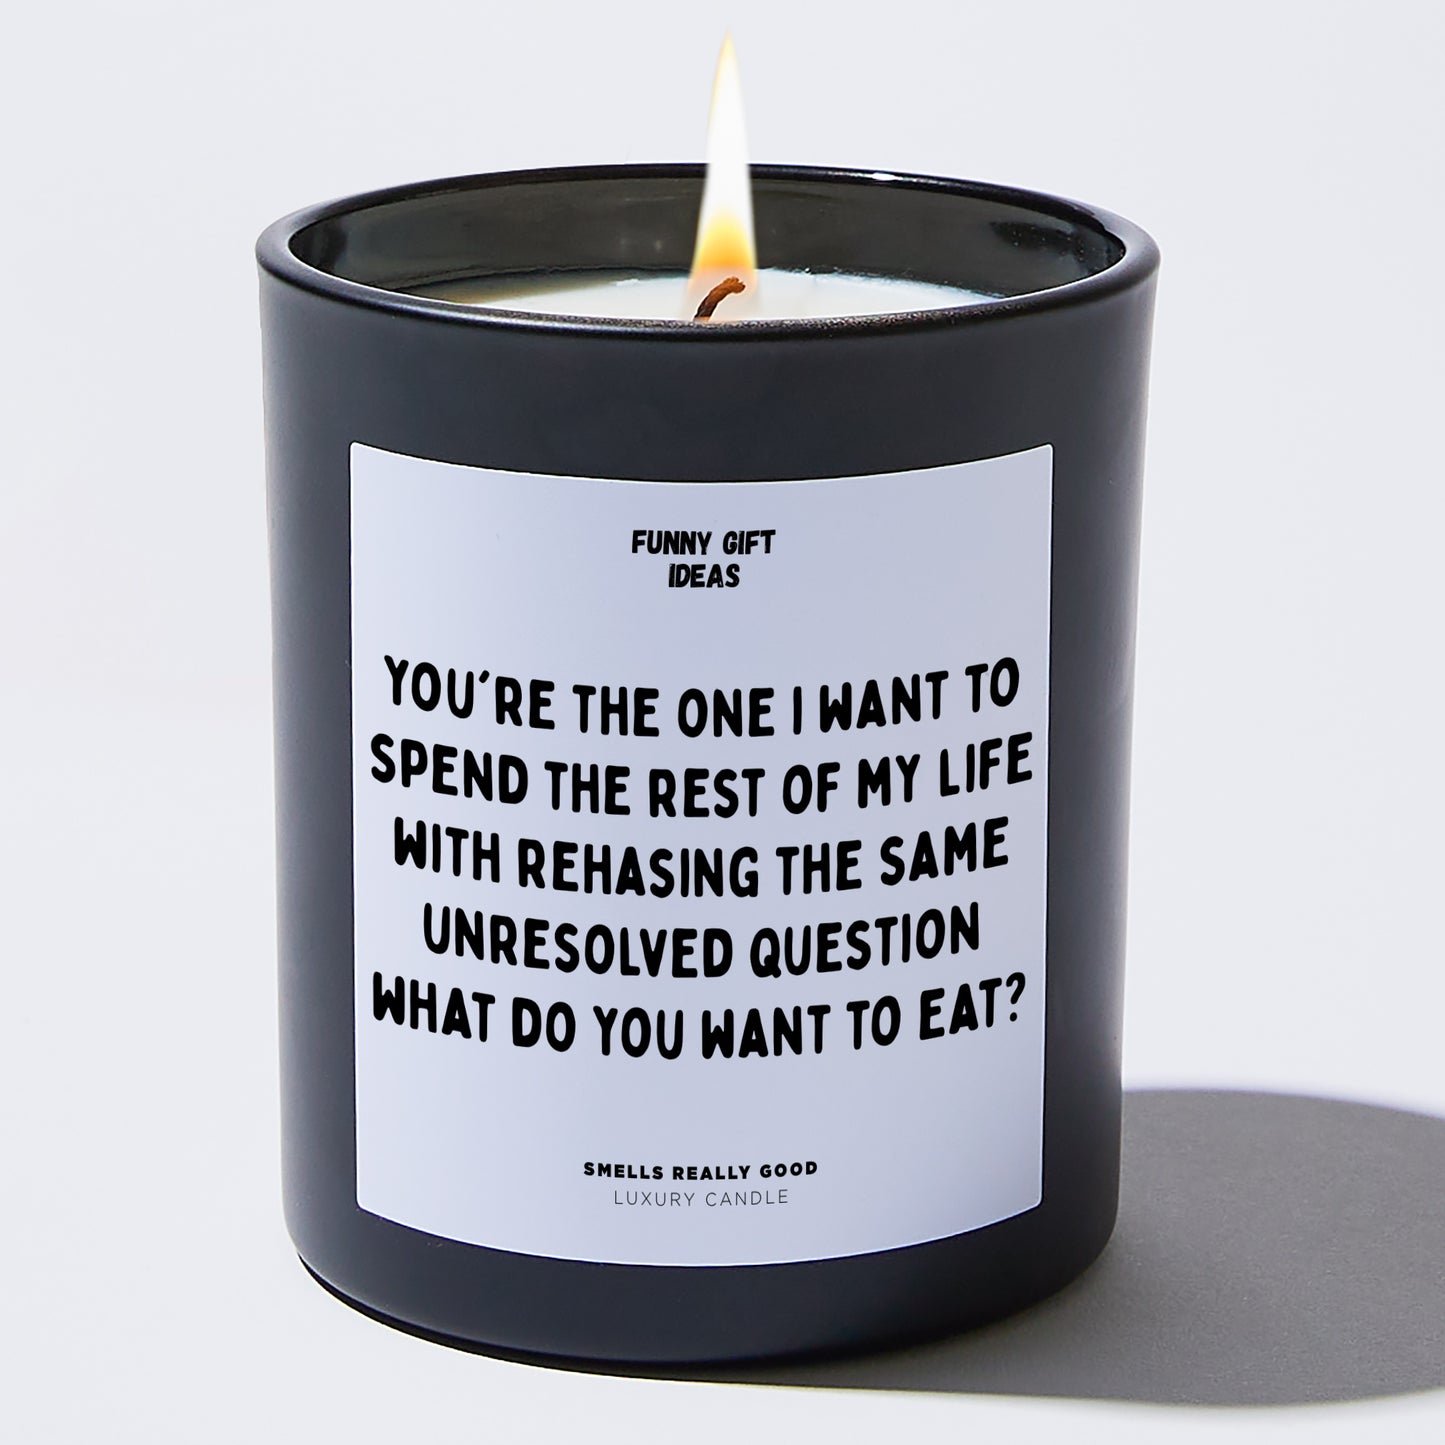 Anniversary Present - You're the One I Want to Spend the Rest of My Life With Rehasing the Same Unresolved Question. What Do You Want to Eat? - Candle